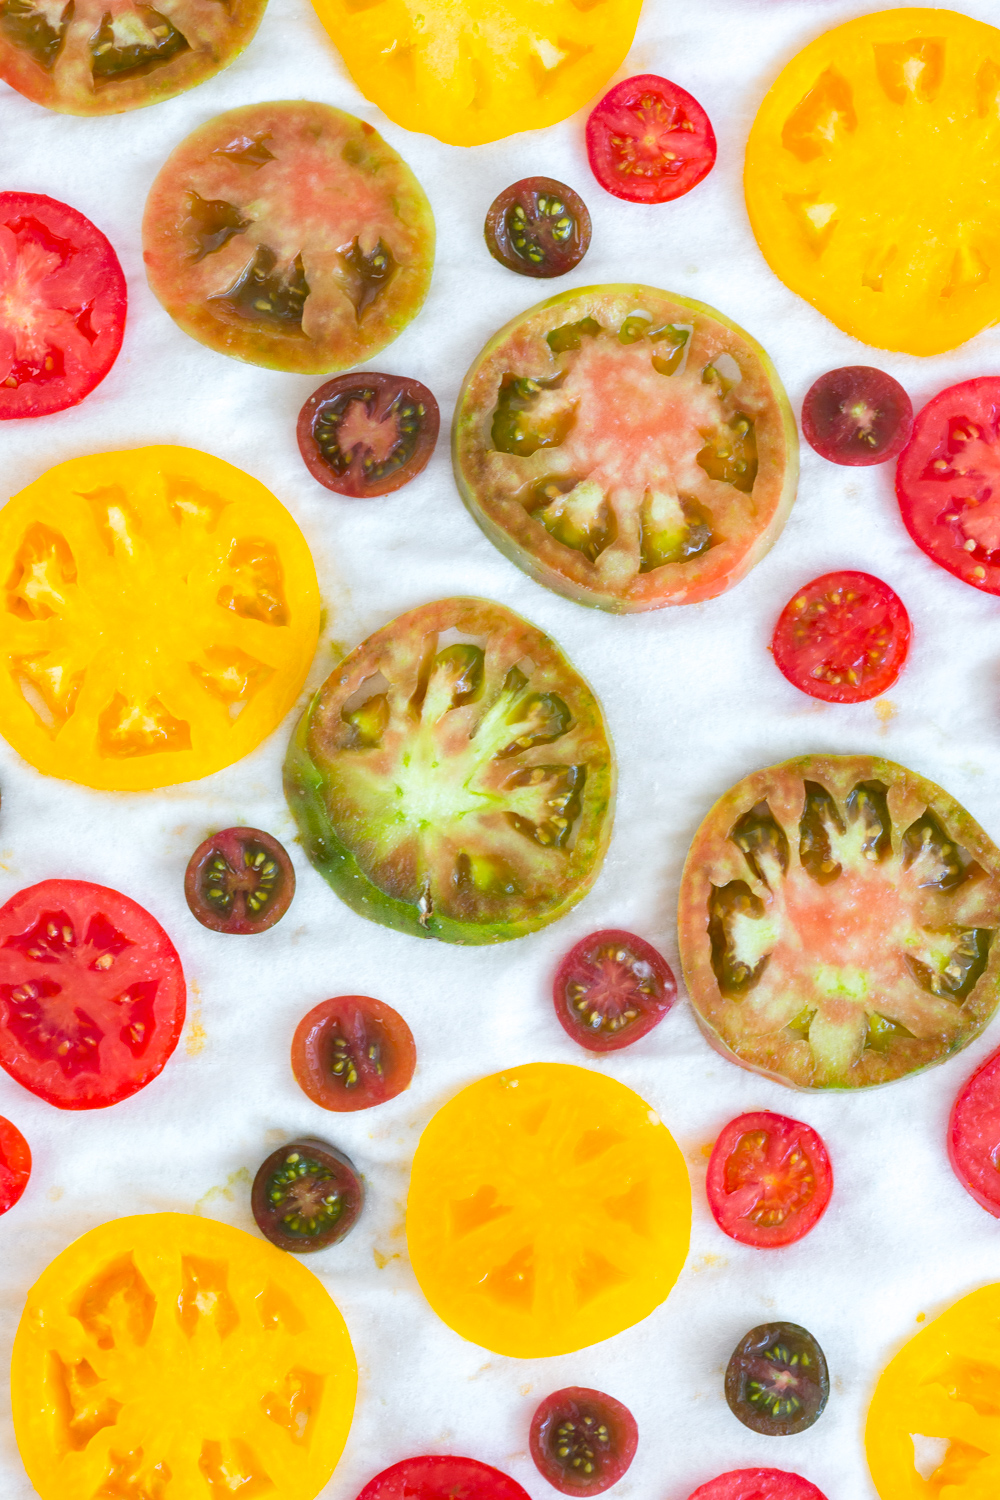 Sliced tomatoes for Heirloom Tomato and Pimento Cheese Tart with Cornmeal Crust